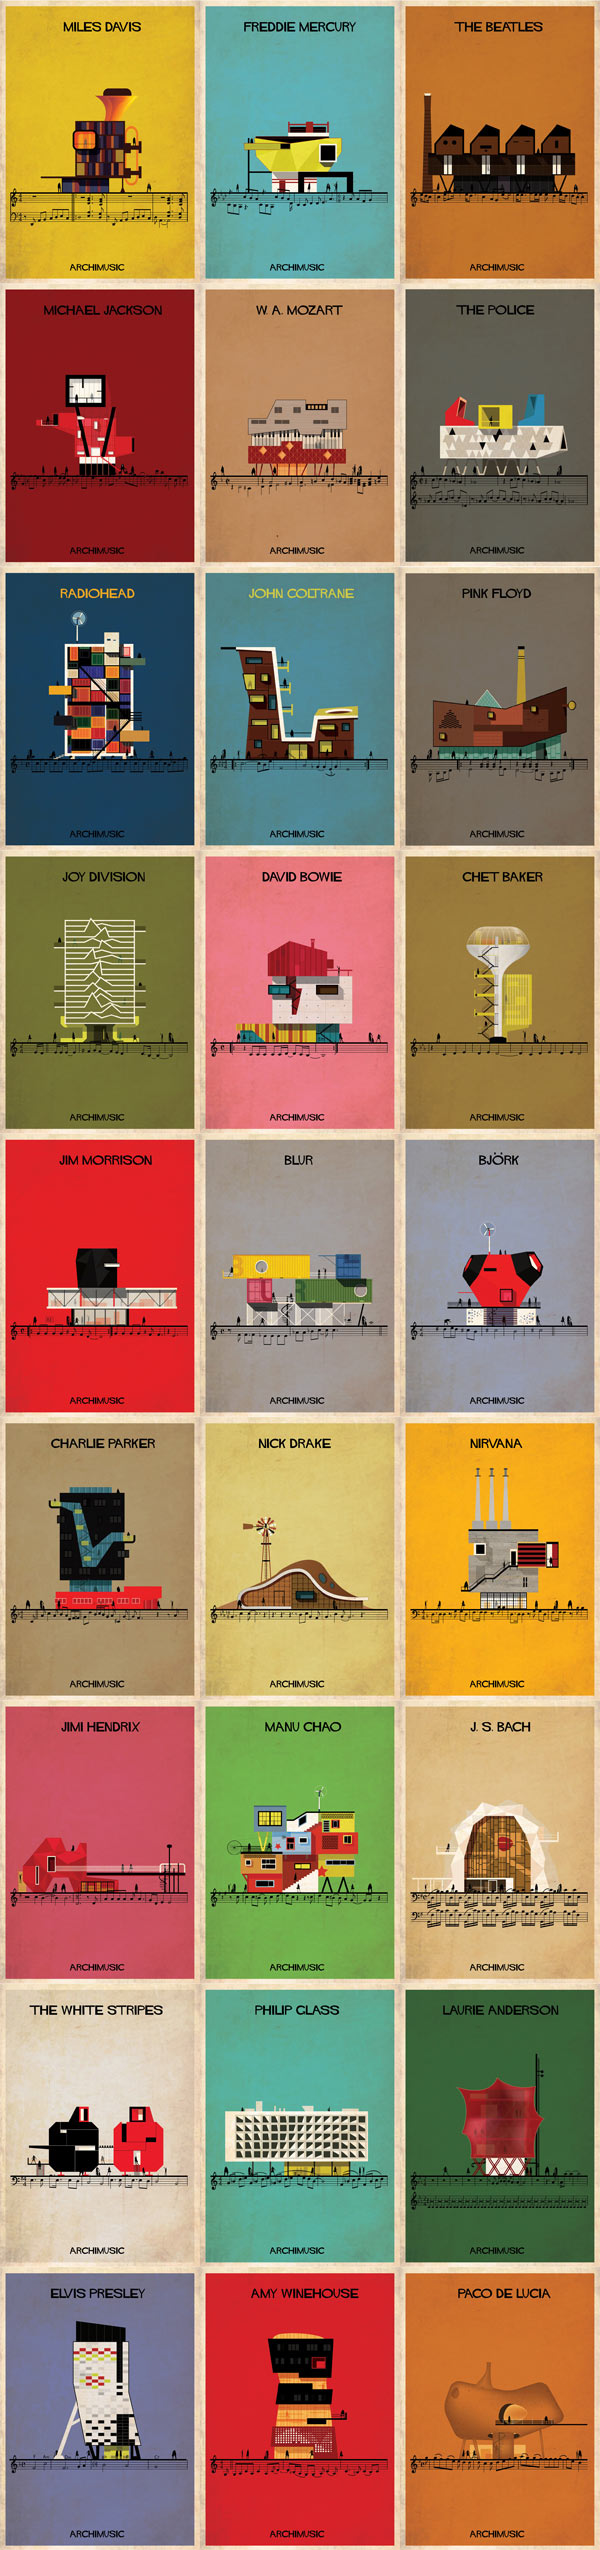 Archimusic-Posters-by-Federico-Babina